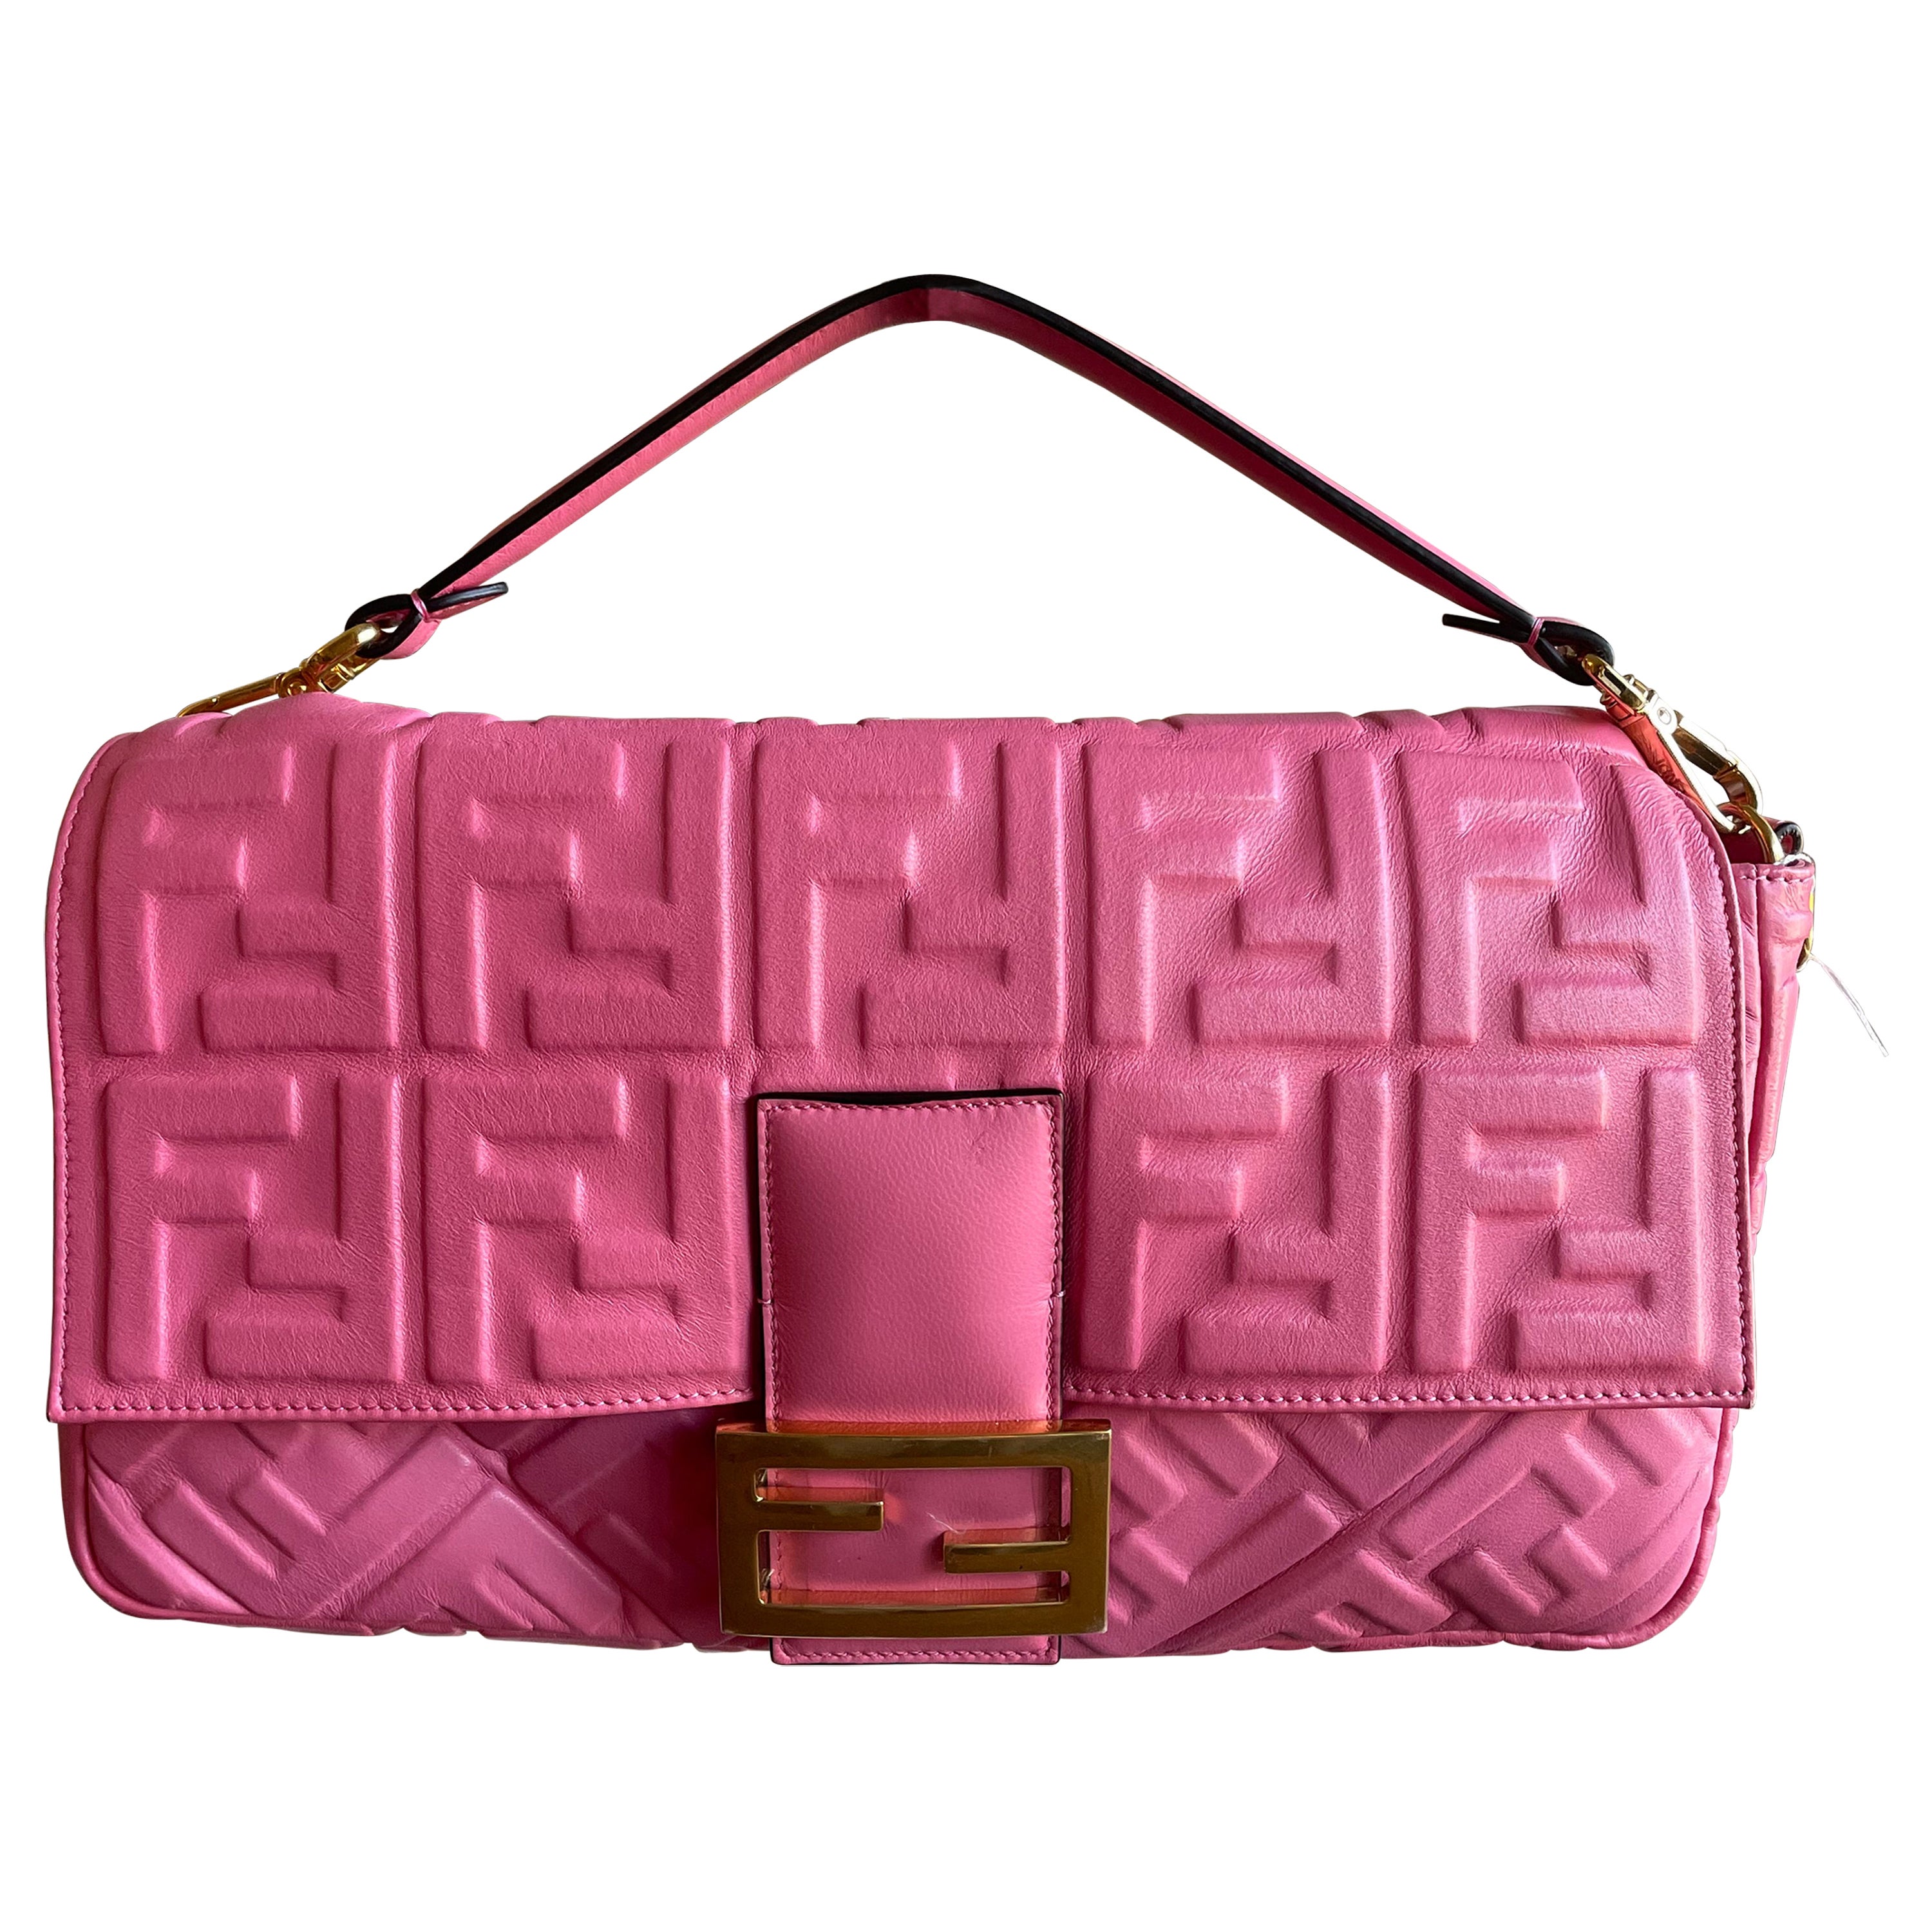 New Fendi baguette bag in pink nappa leather.